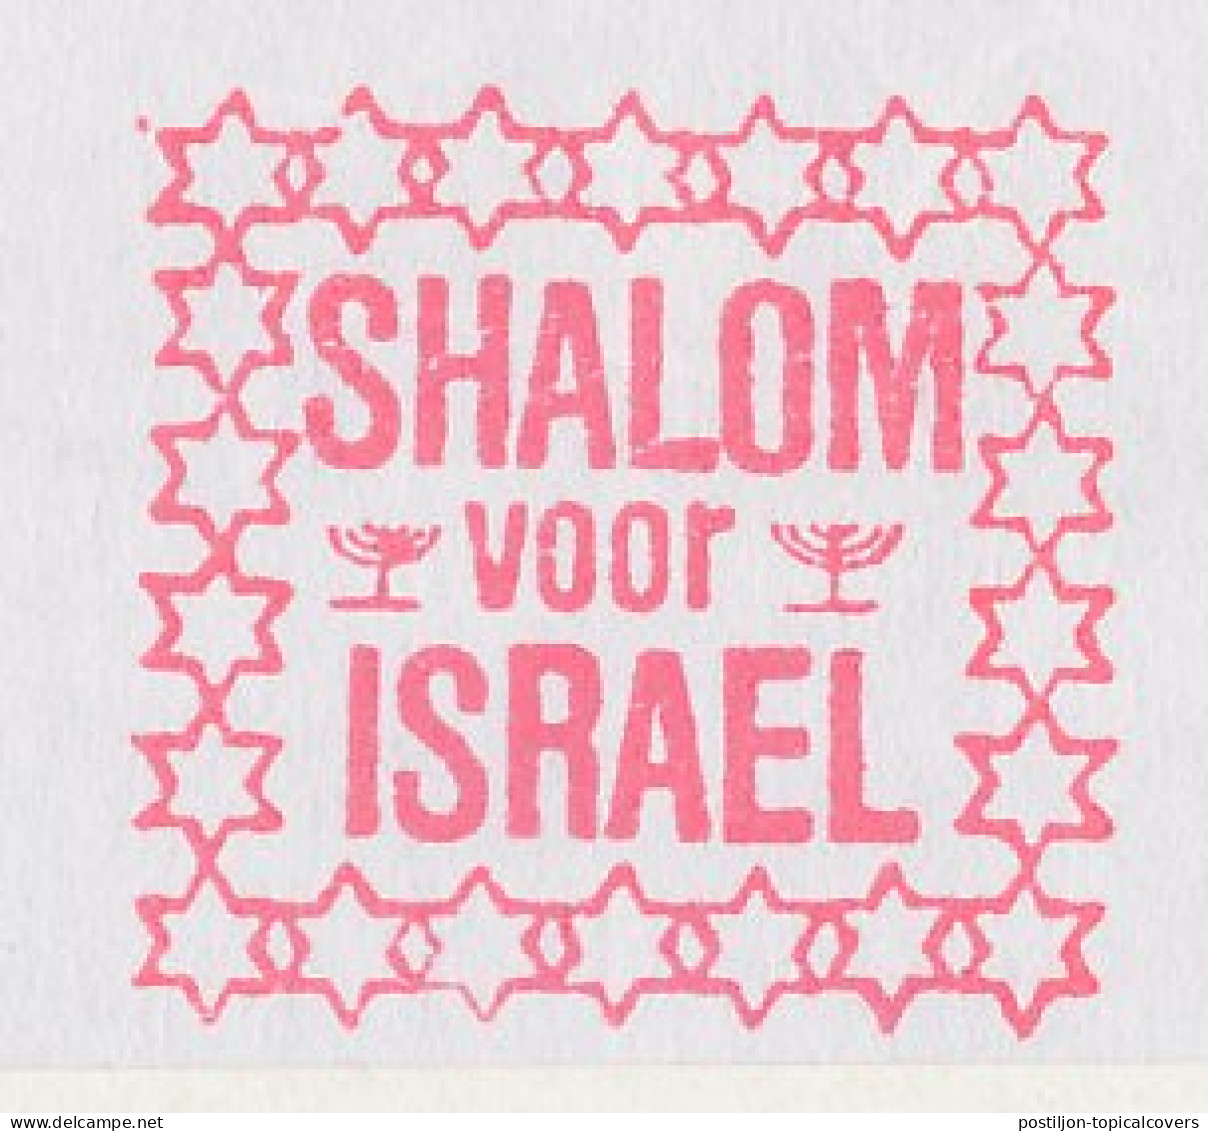 Meter Cover Netherlands 1990 Shalom For Israel - Embassy Of Israel - The Hague - Non Classificati